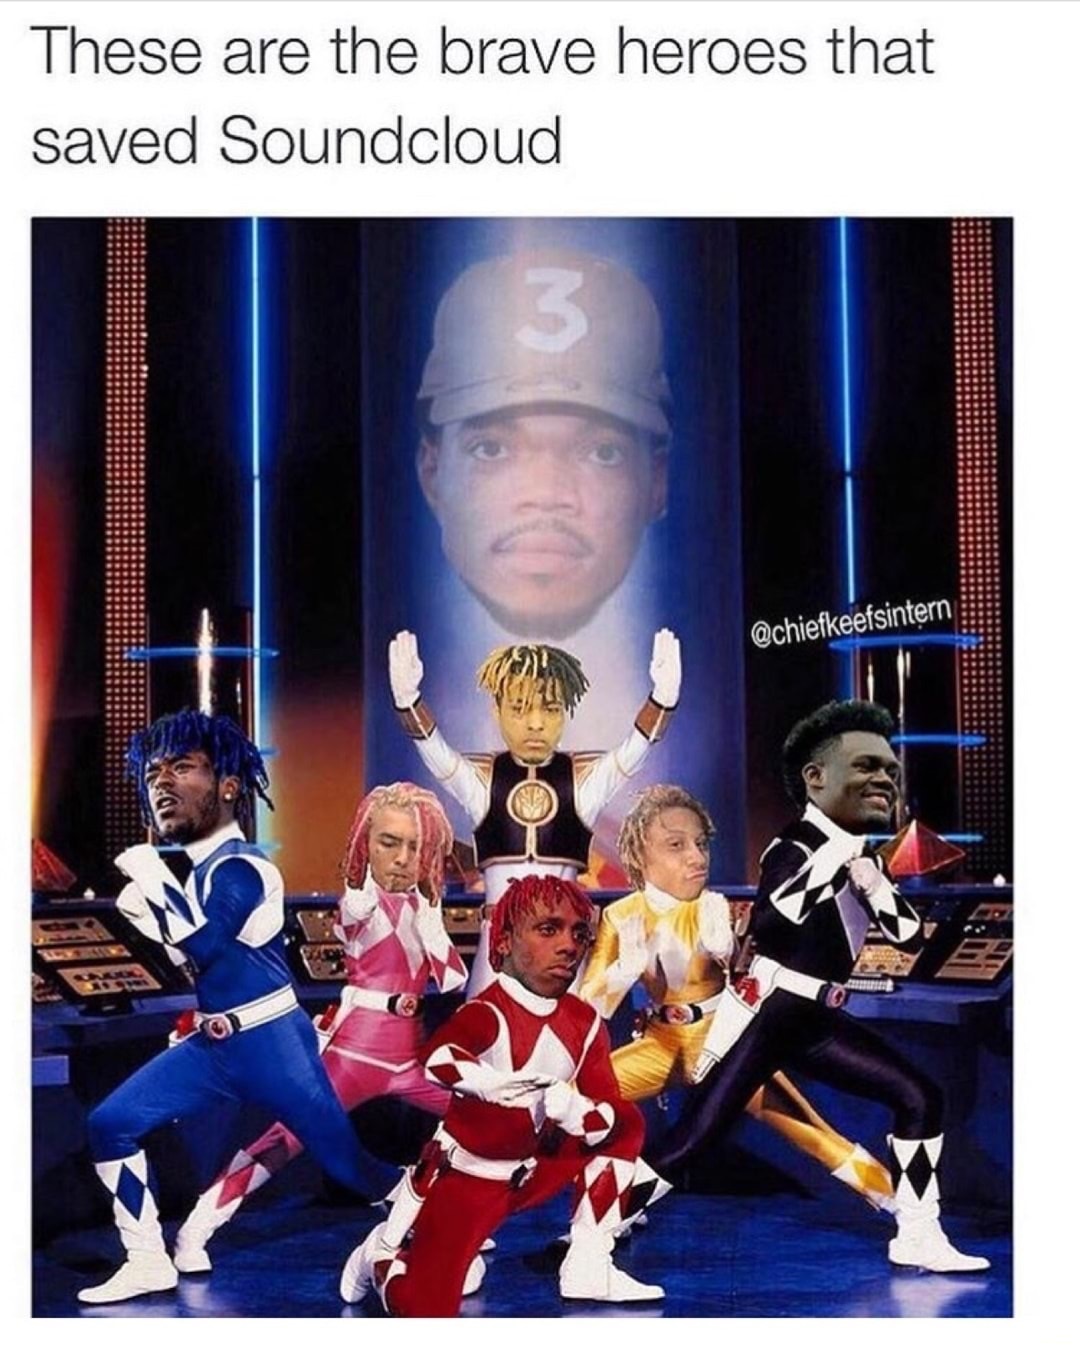 mighty morphin power rangers - These are the brave heroes that saved Soundcloud